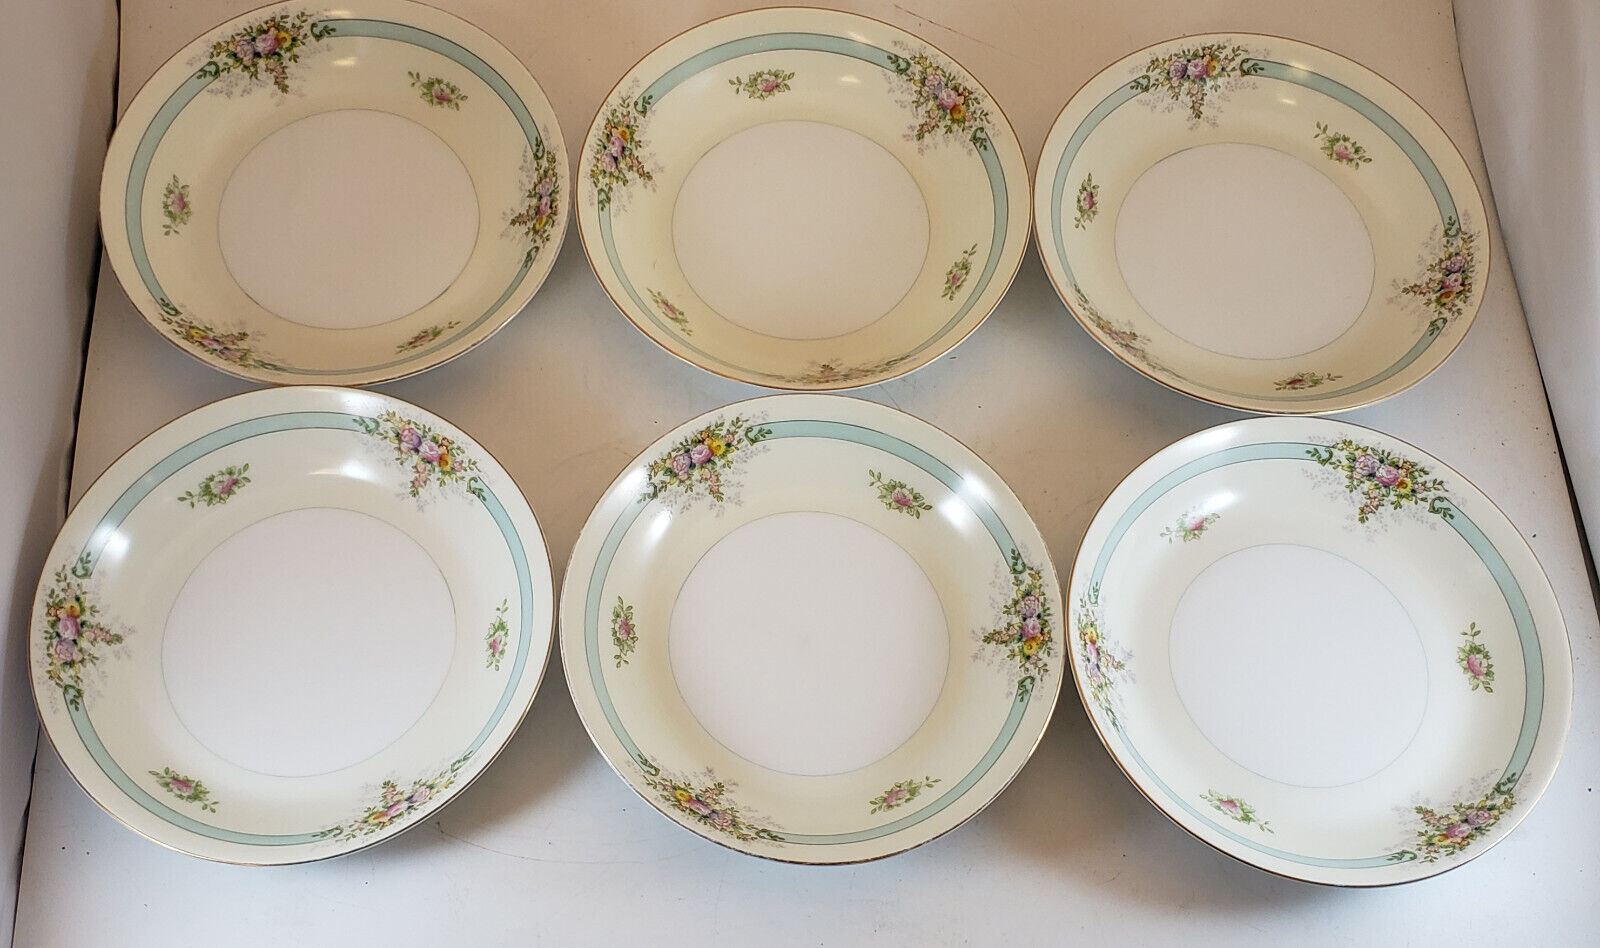 Pink Rose Vintage Meito China 6 Salad or Soup Bowls Made in Japan Good Condition